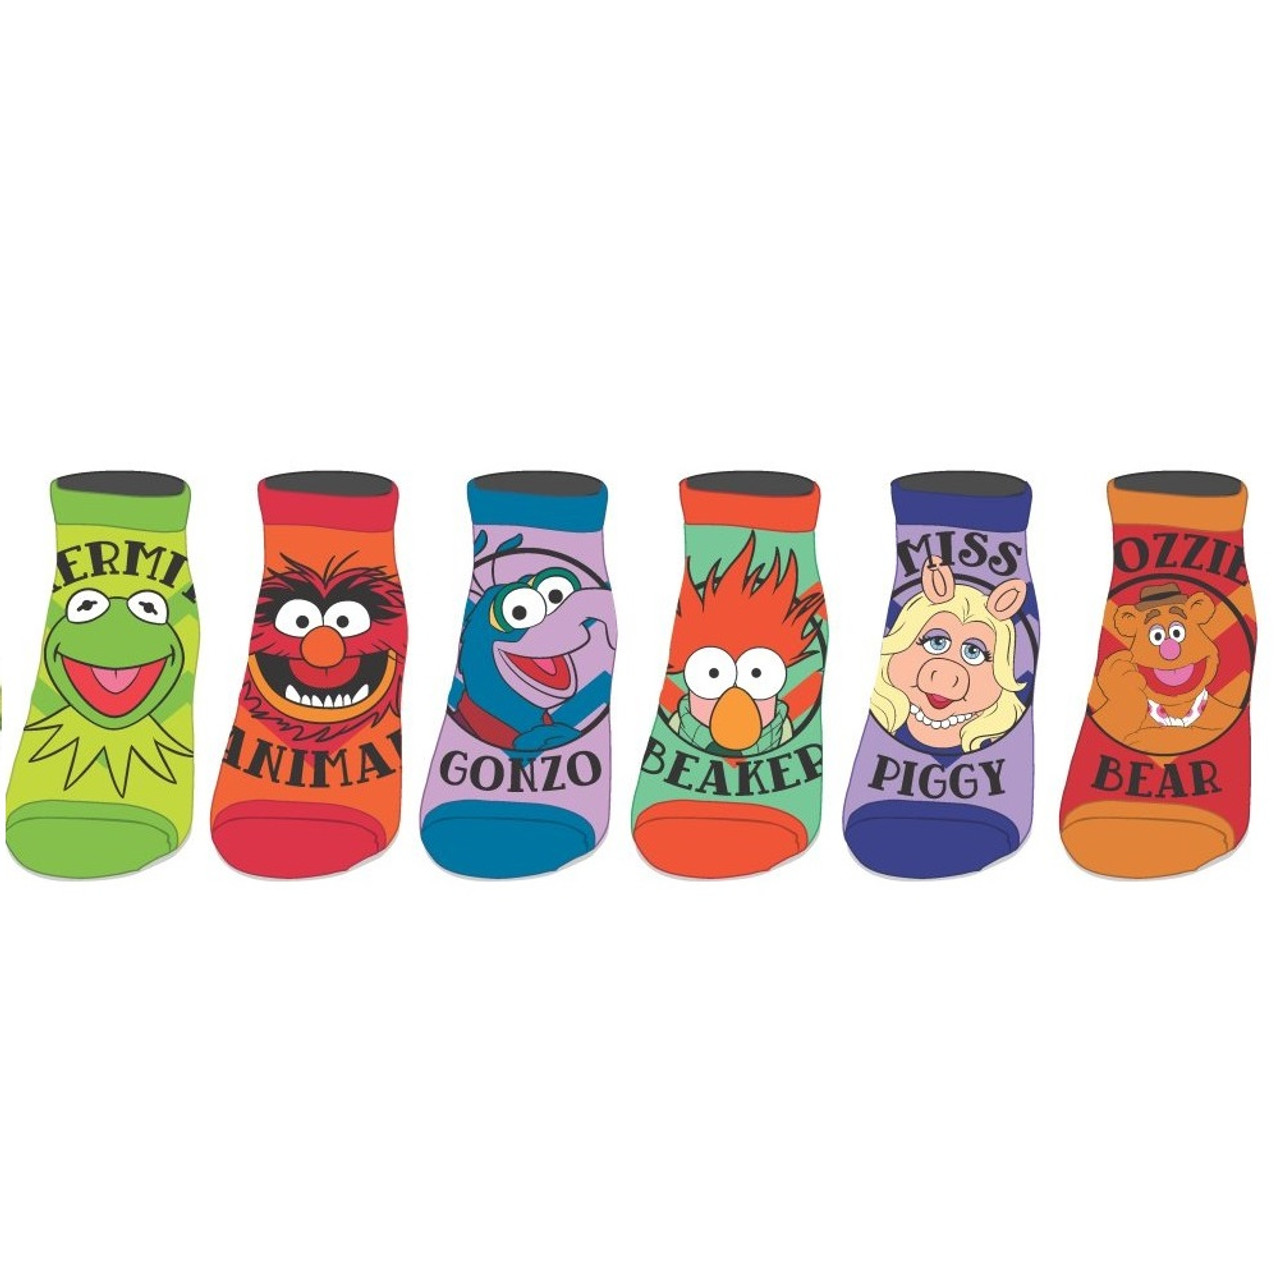 The Muppets 6-Pair Pack of Ankle Socks